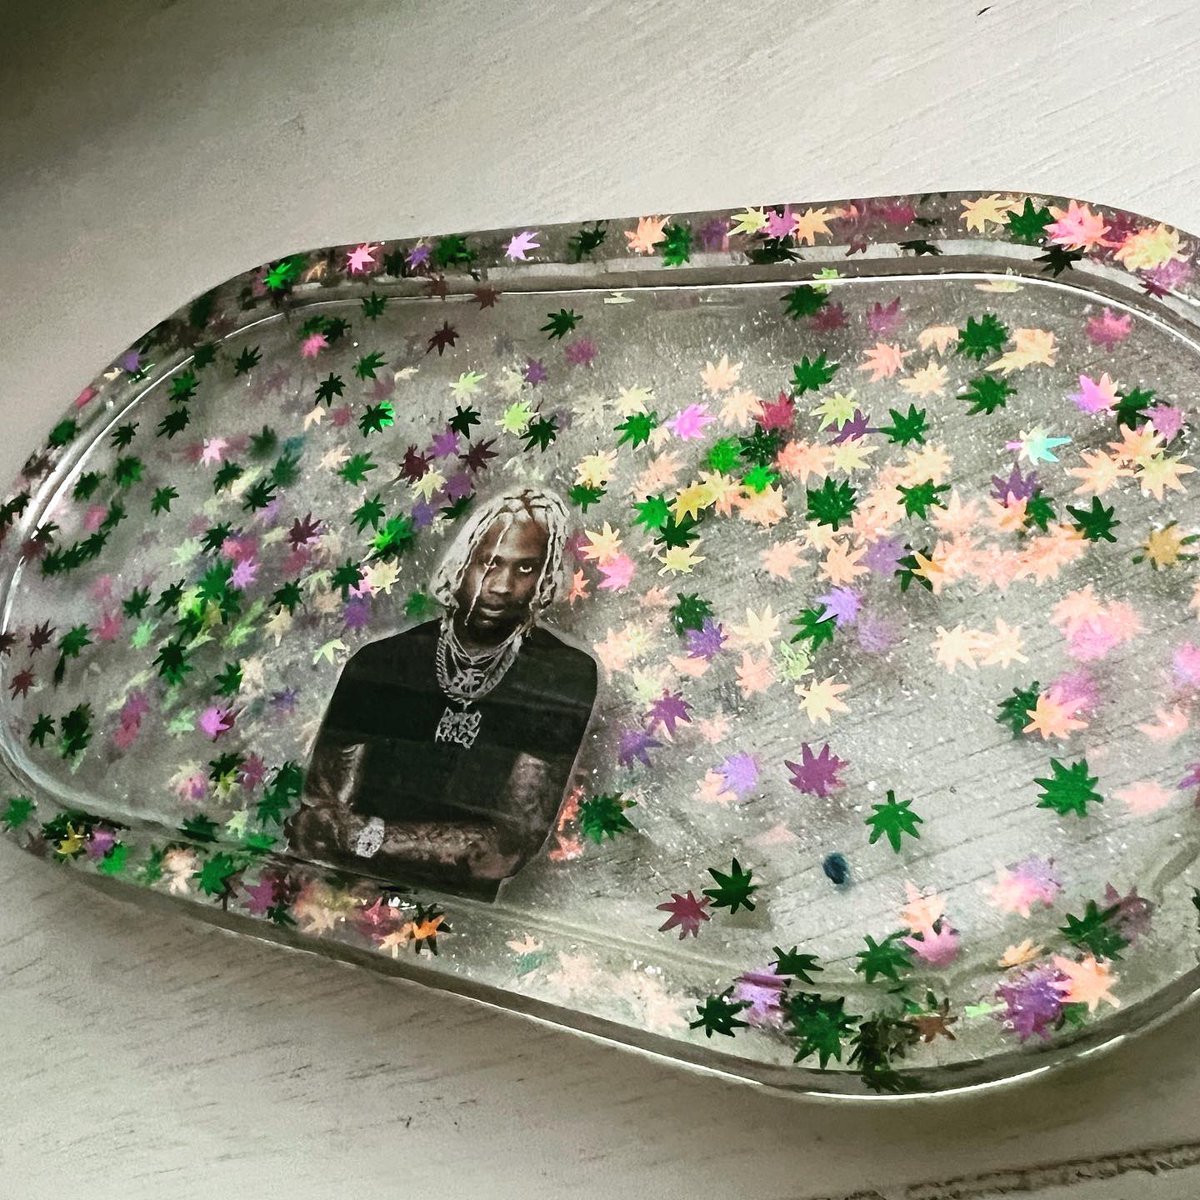 A lil custom we made!✨

Mini rollling tray set:
One (1) mini rolling tray & one (1) mini ashtray included! 
Place your orders to get yours soon!💚💜
.
.
.
#resinartist #resinrollingtray #kush #420friendly #smokeset #cutesmokeset #cuterollingtrays #supportsmallbusiness #shoplocal